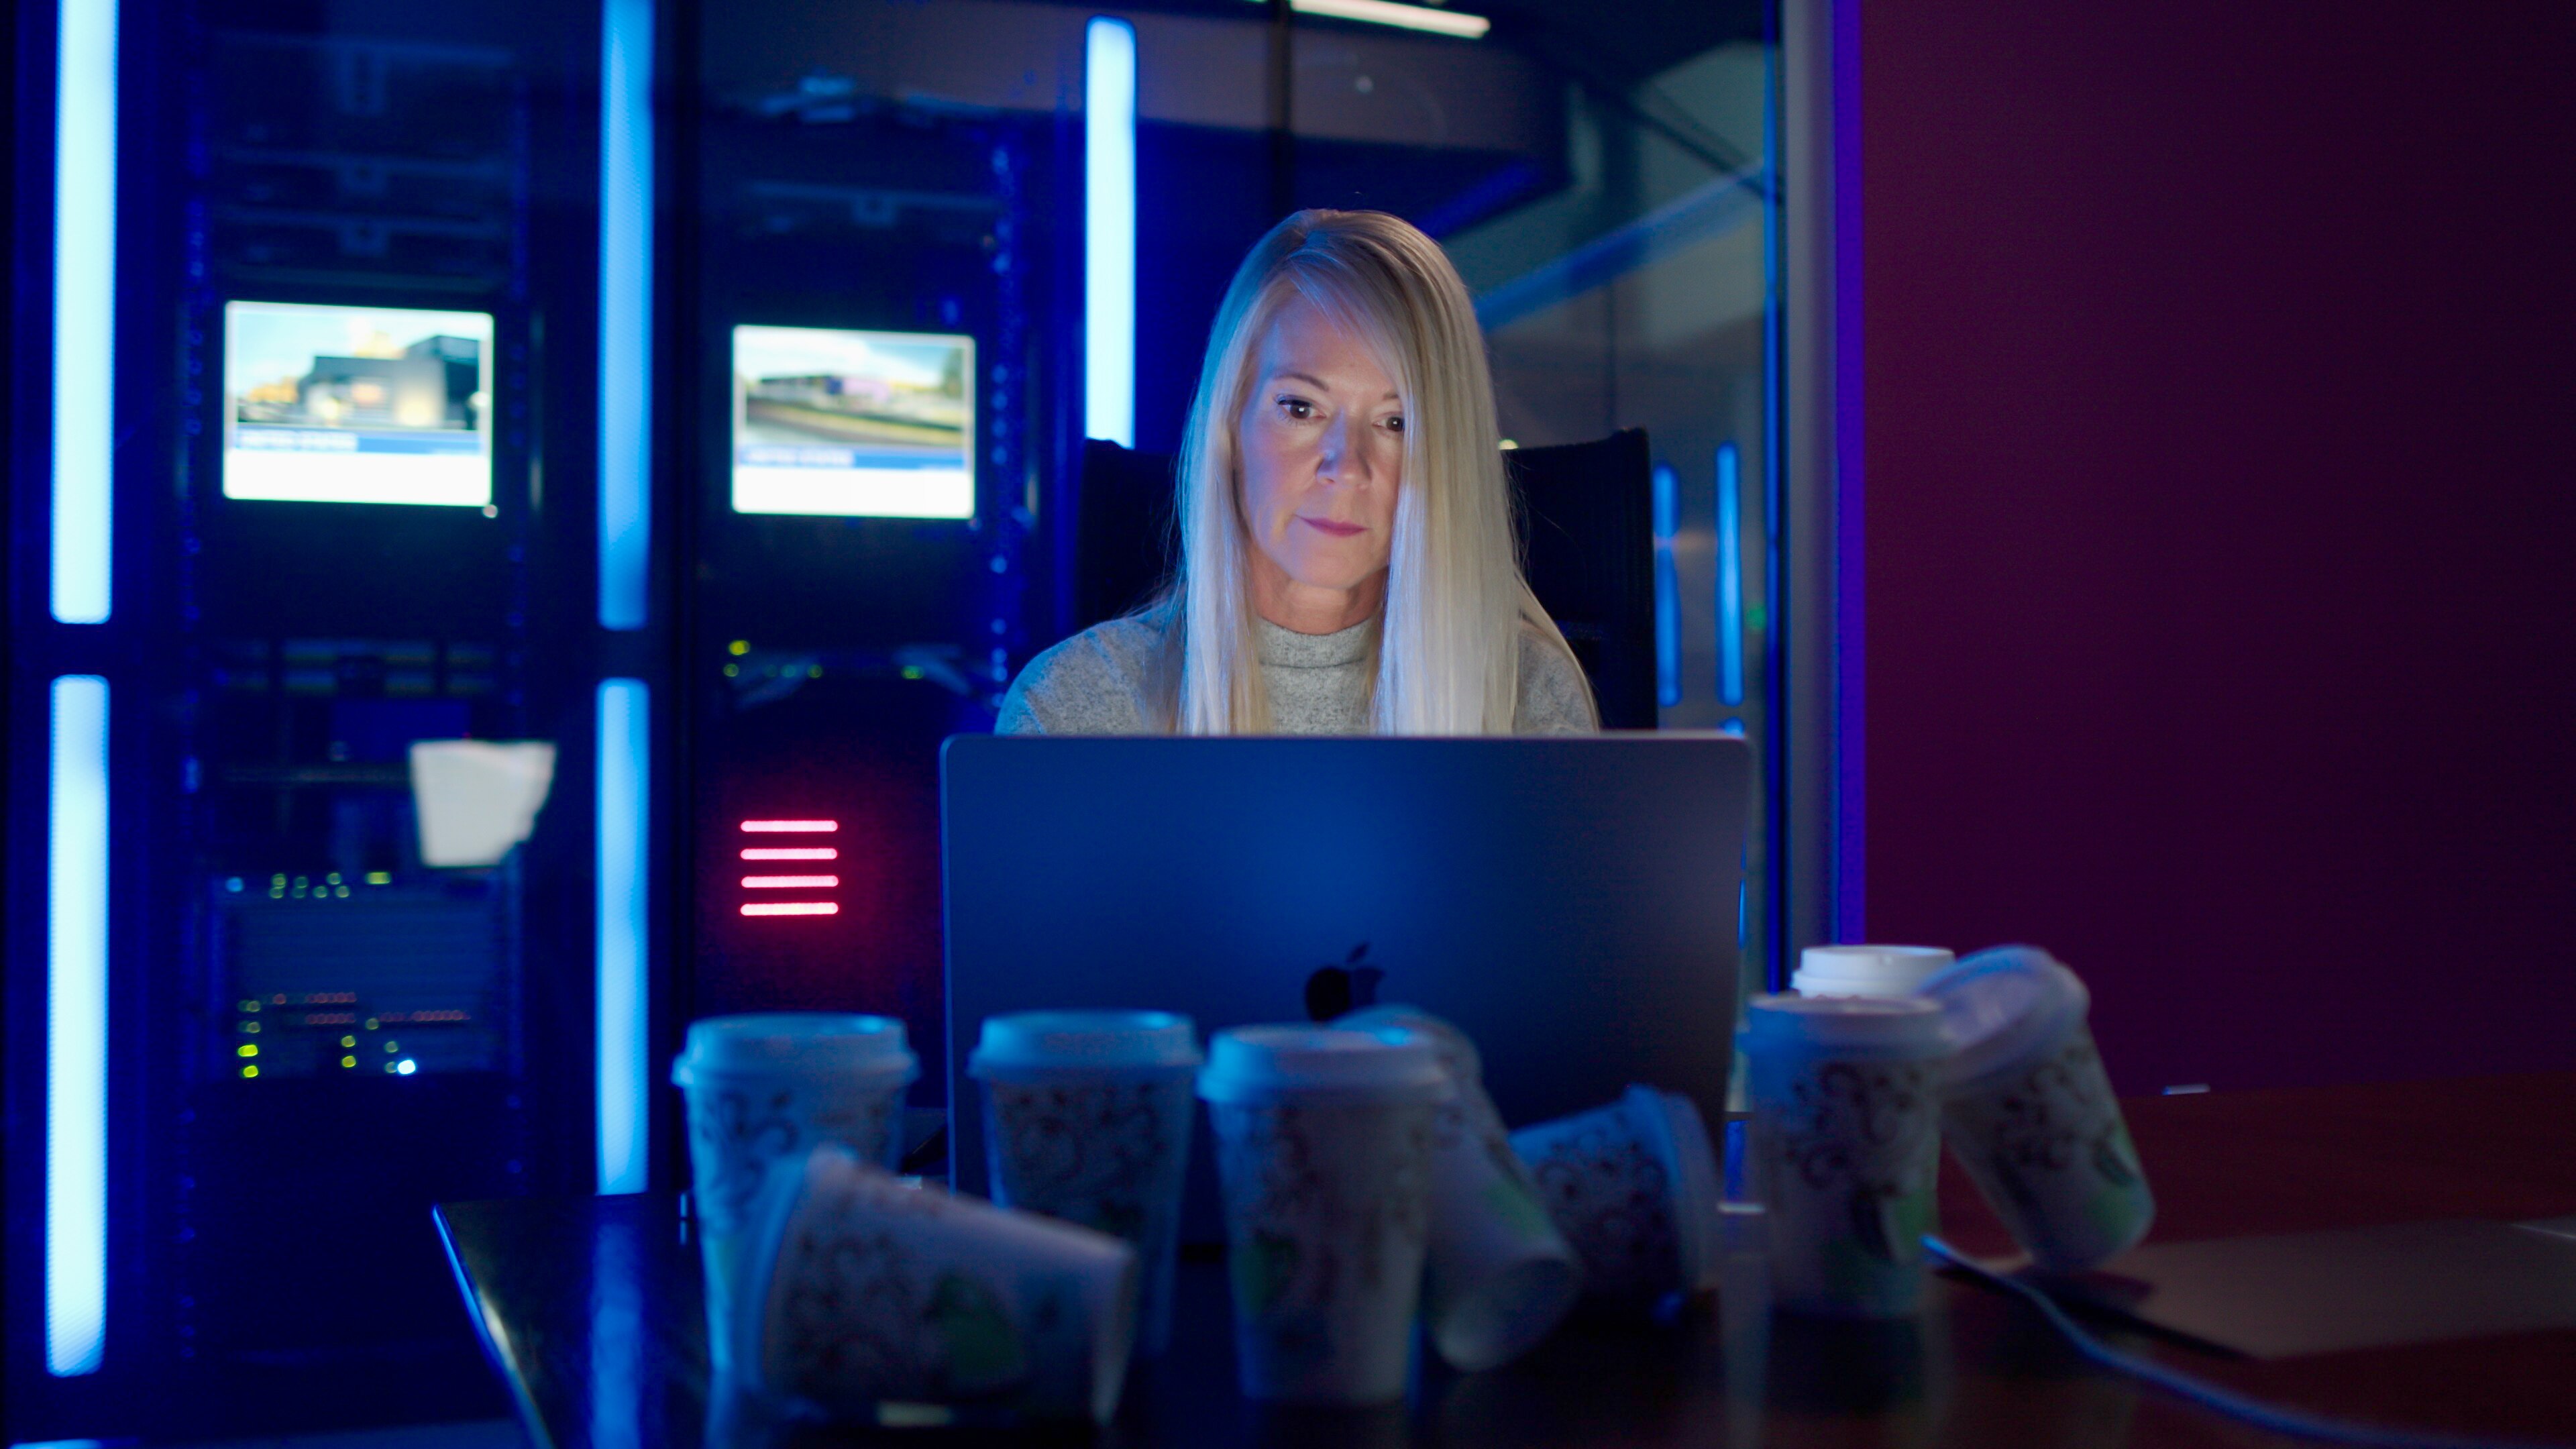 Woman working late at a data center surrounded by empty coffee cups